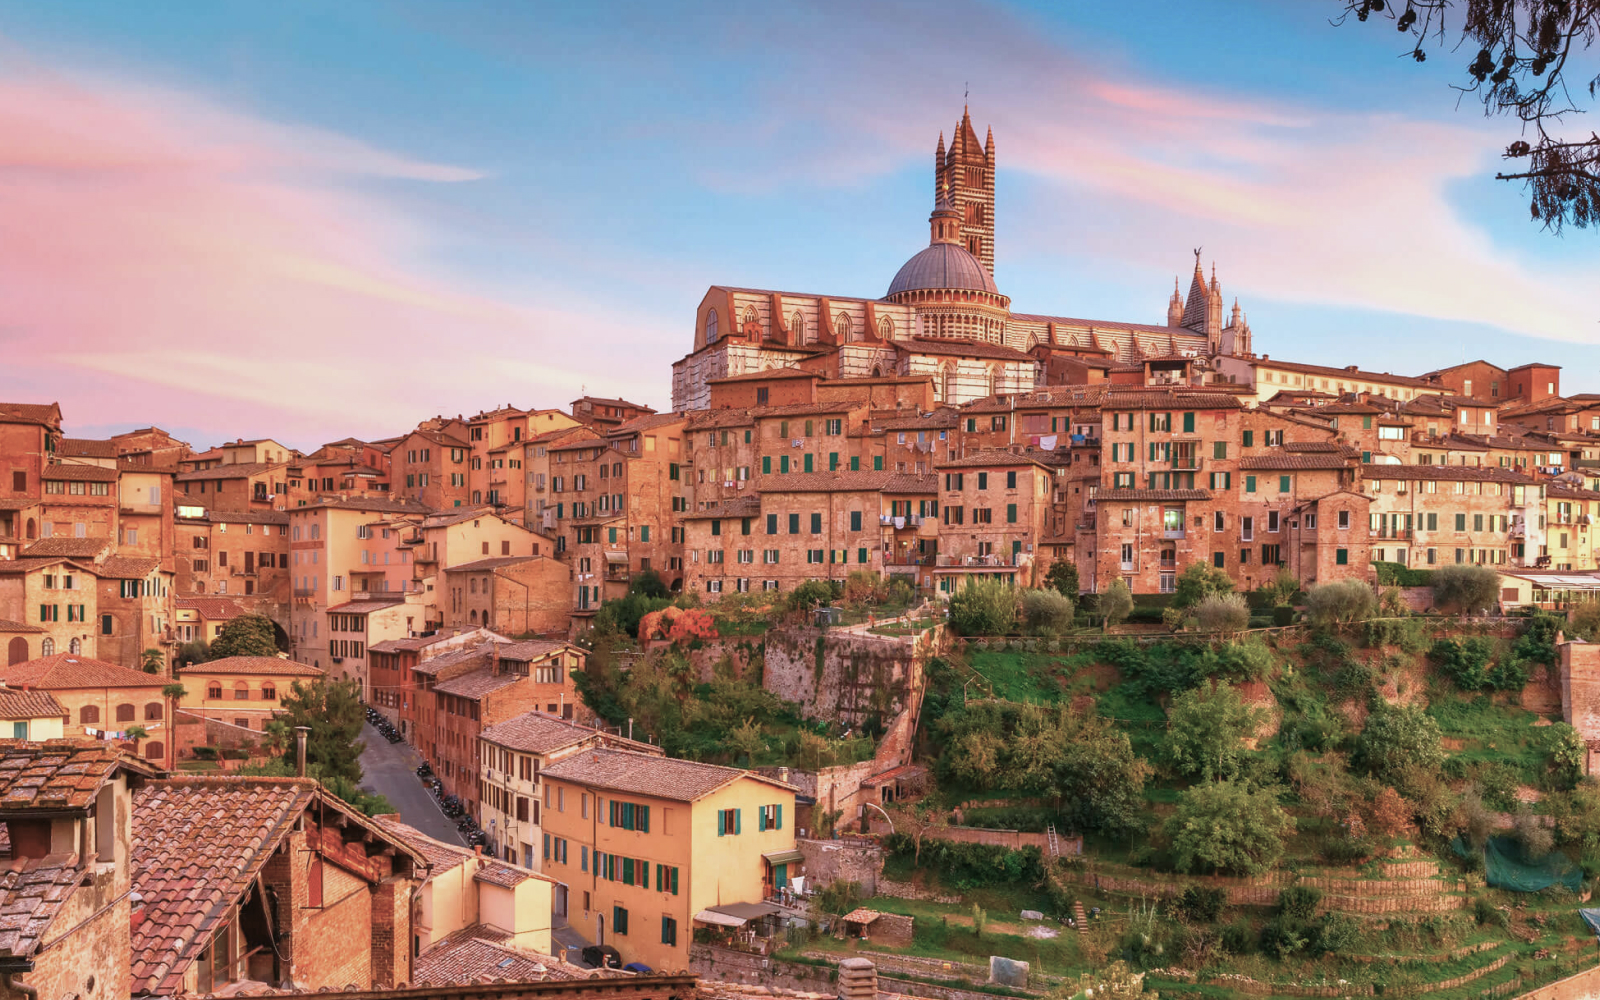 Siena and its center: what to - Italia.it